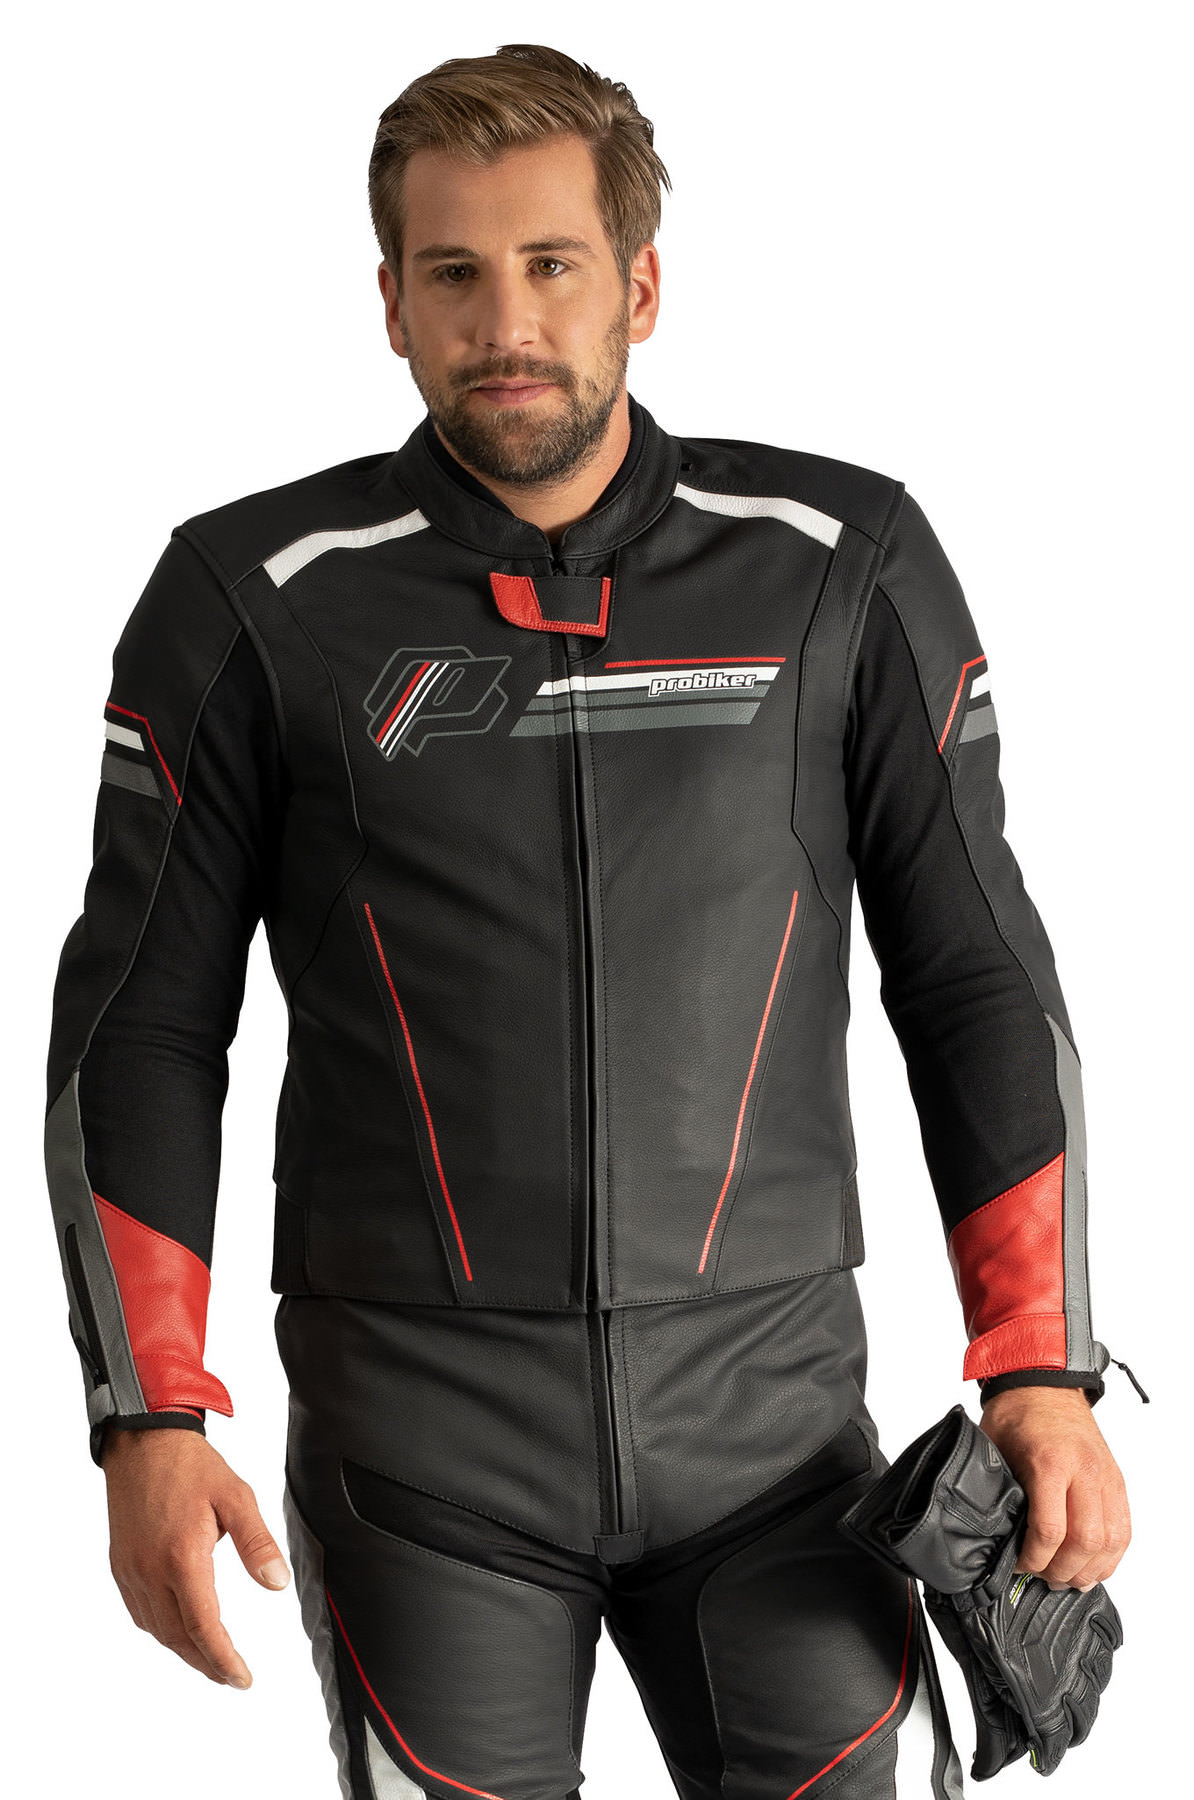 Buy Probiker PR-19 Jacket | Louis motorcycle clothing and 